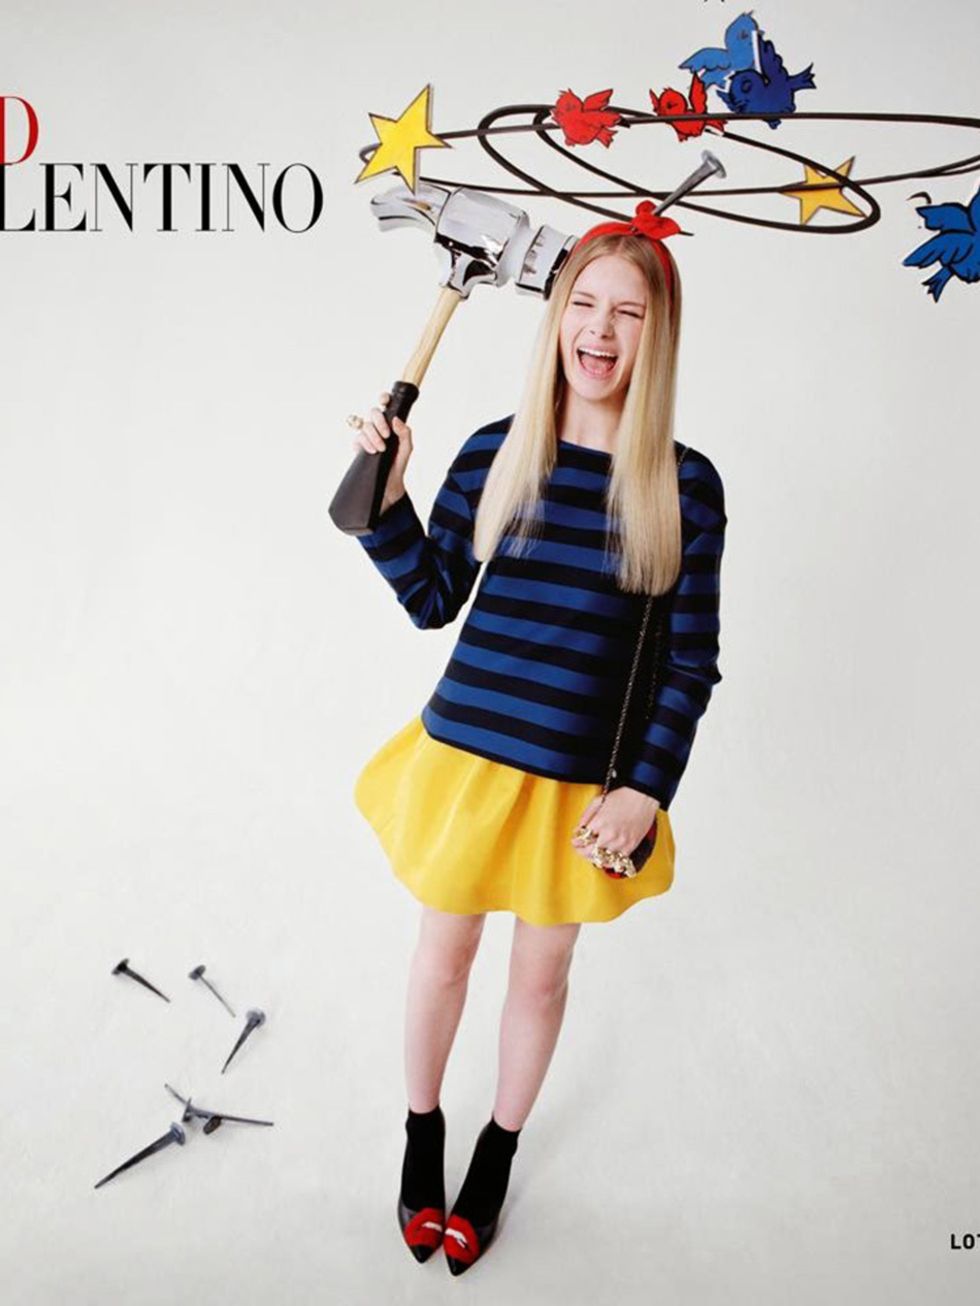 Red Valentino campaign featuring Lottie Moss.